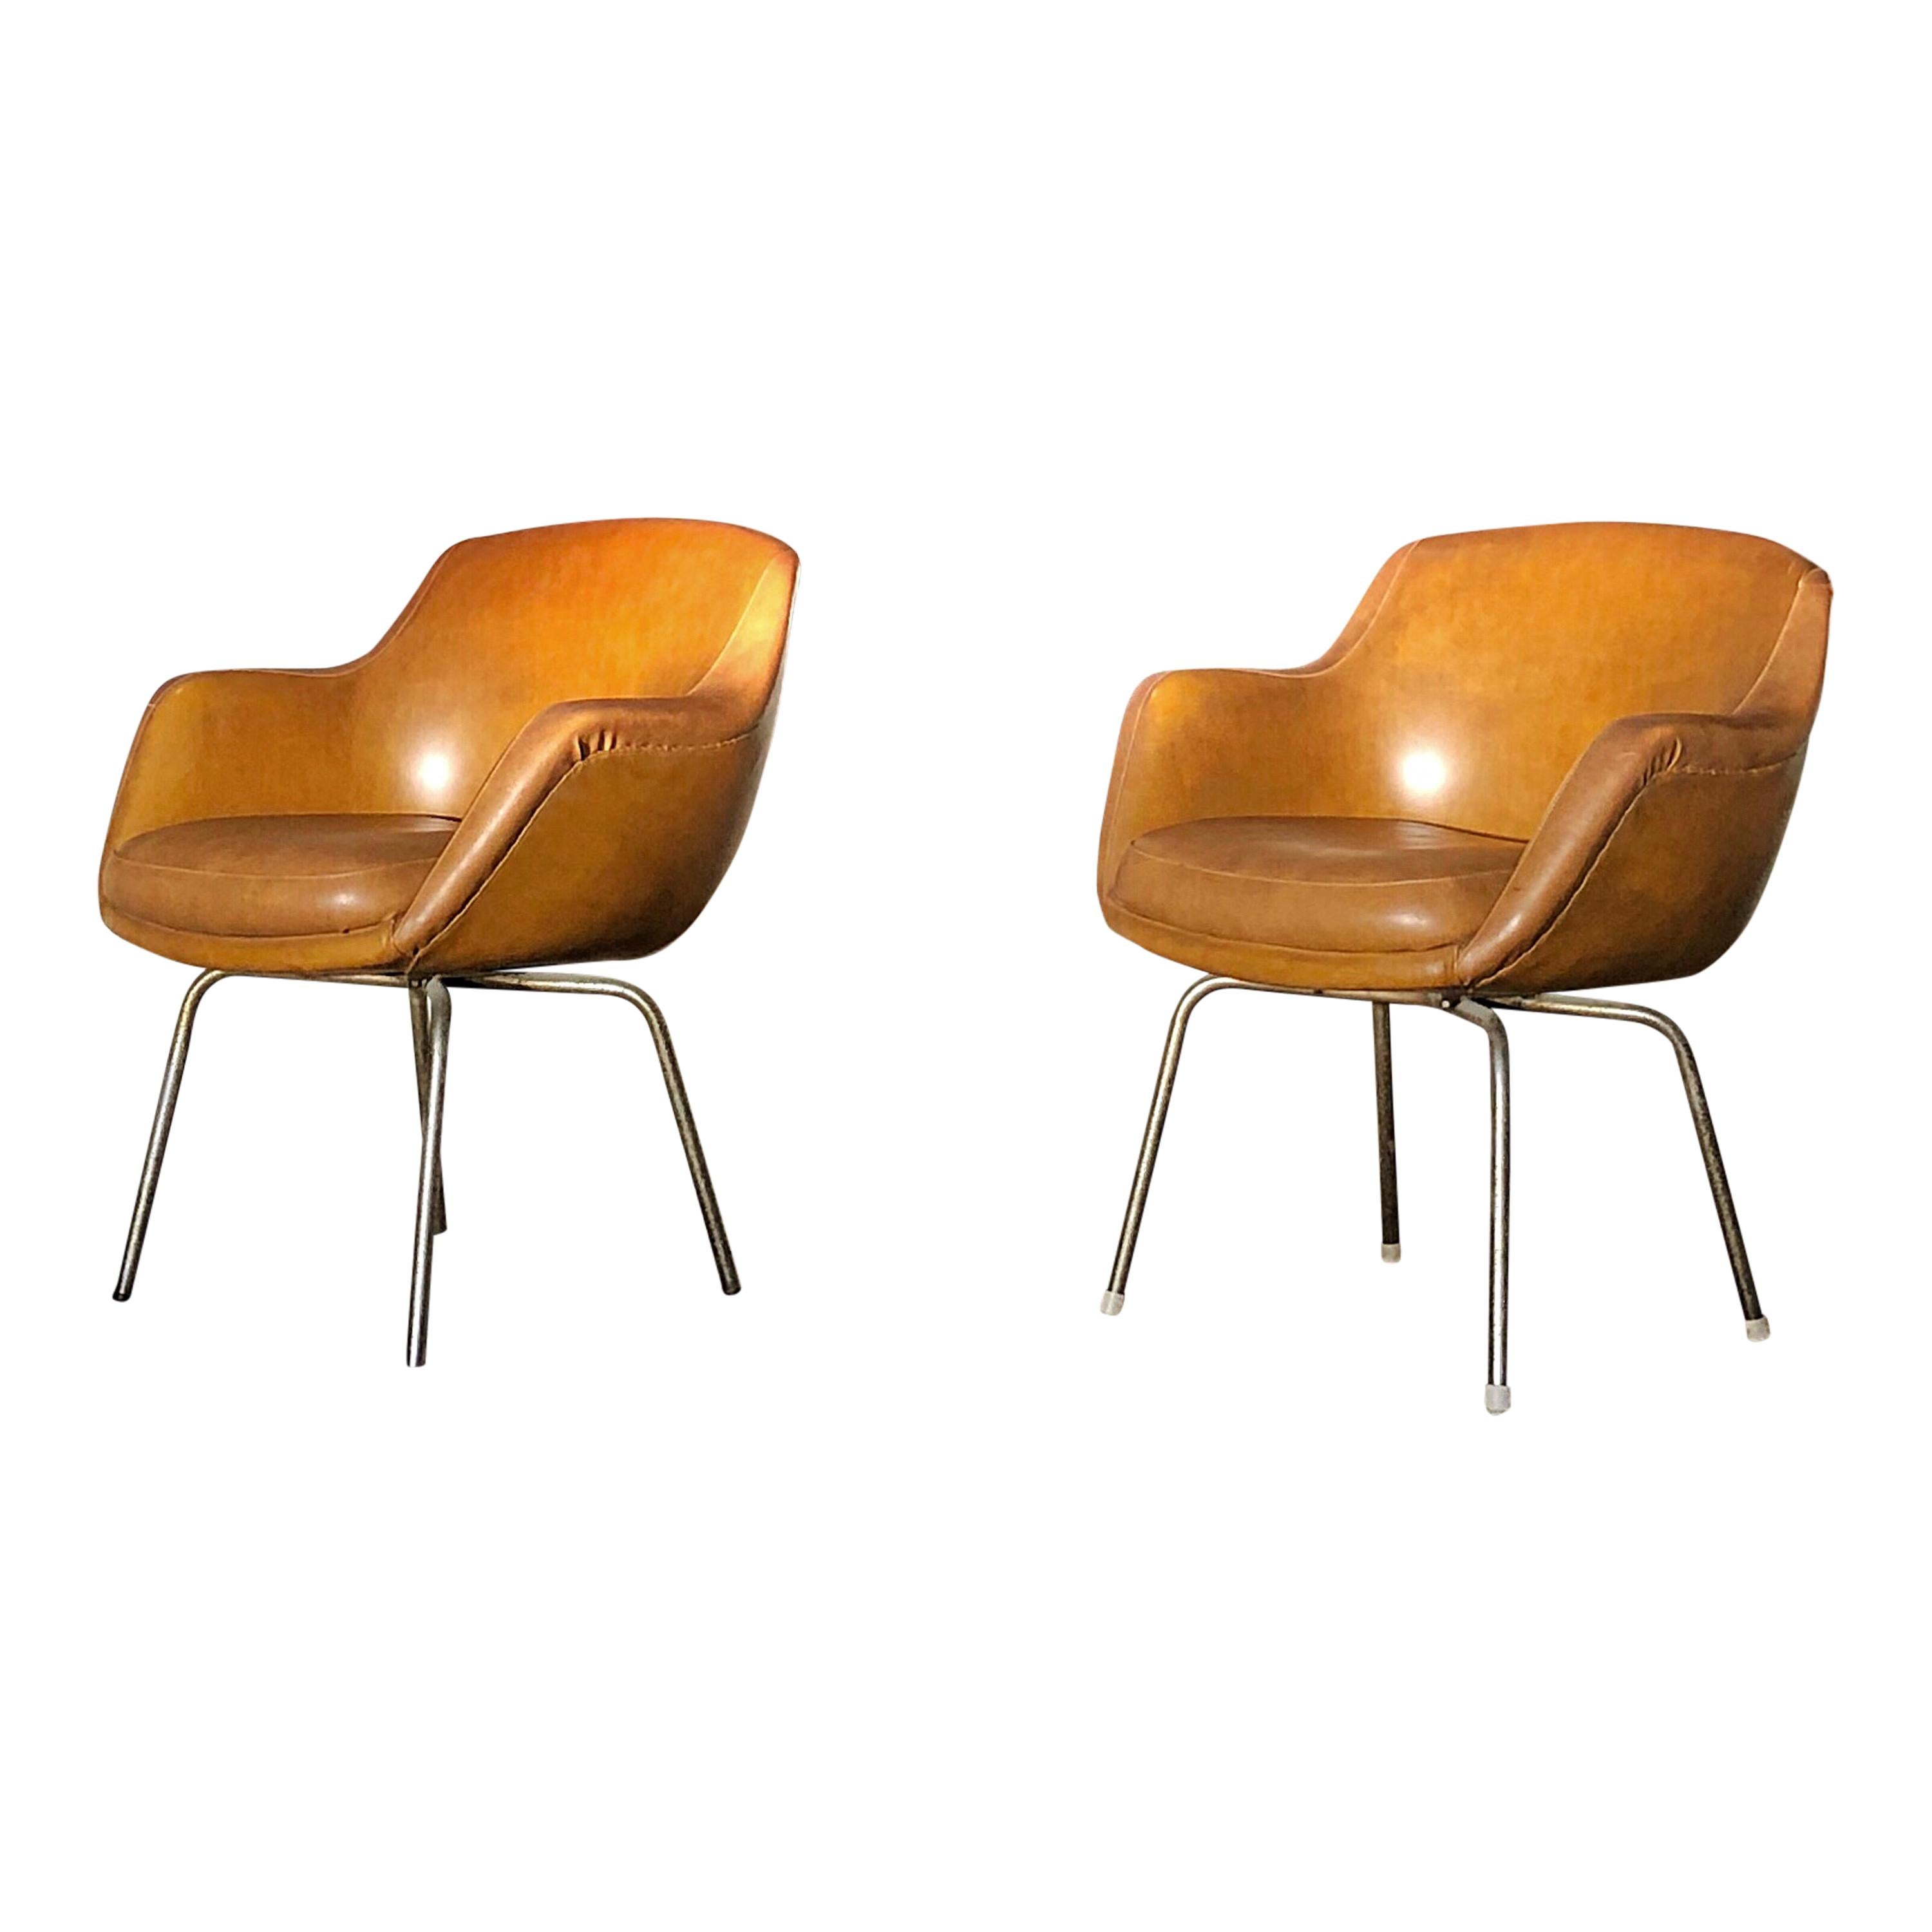 Set of two leather armchairs in the style of Arne Jacobsen manufactured in Italy in the 1960s.
Danish Mid-Century Modern style.